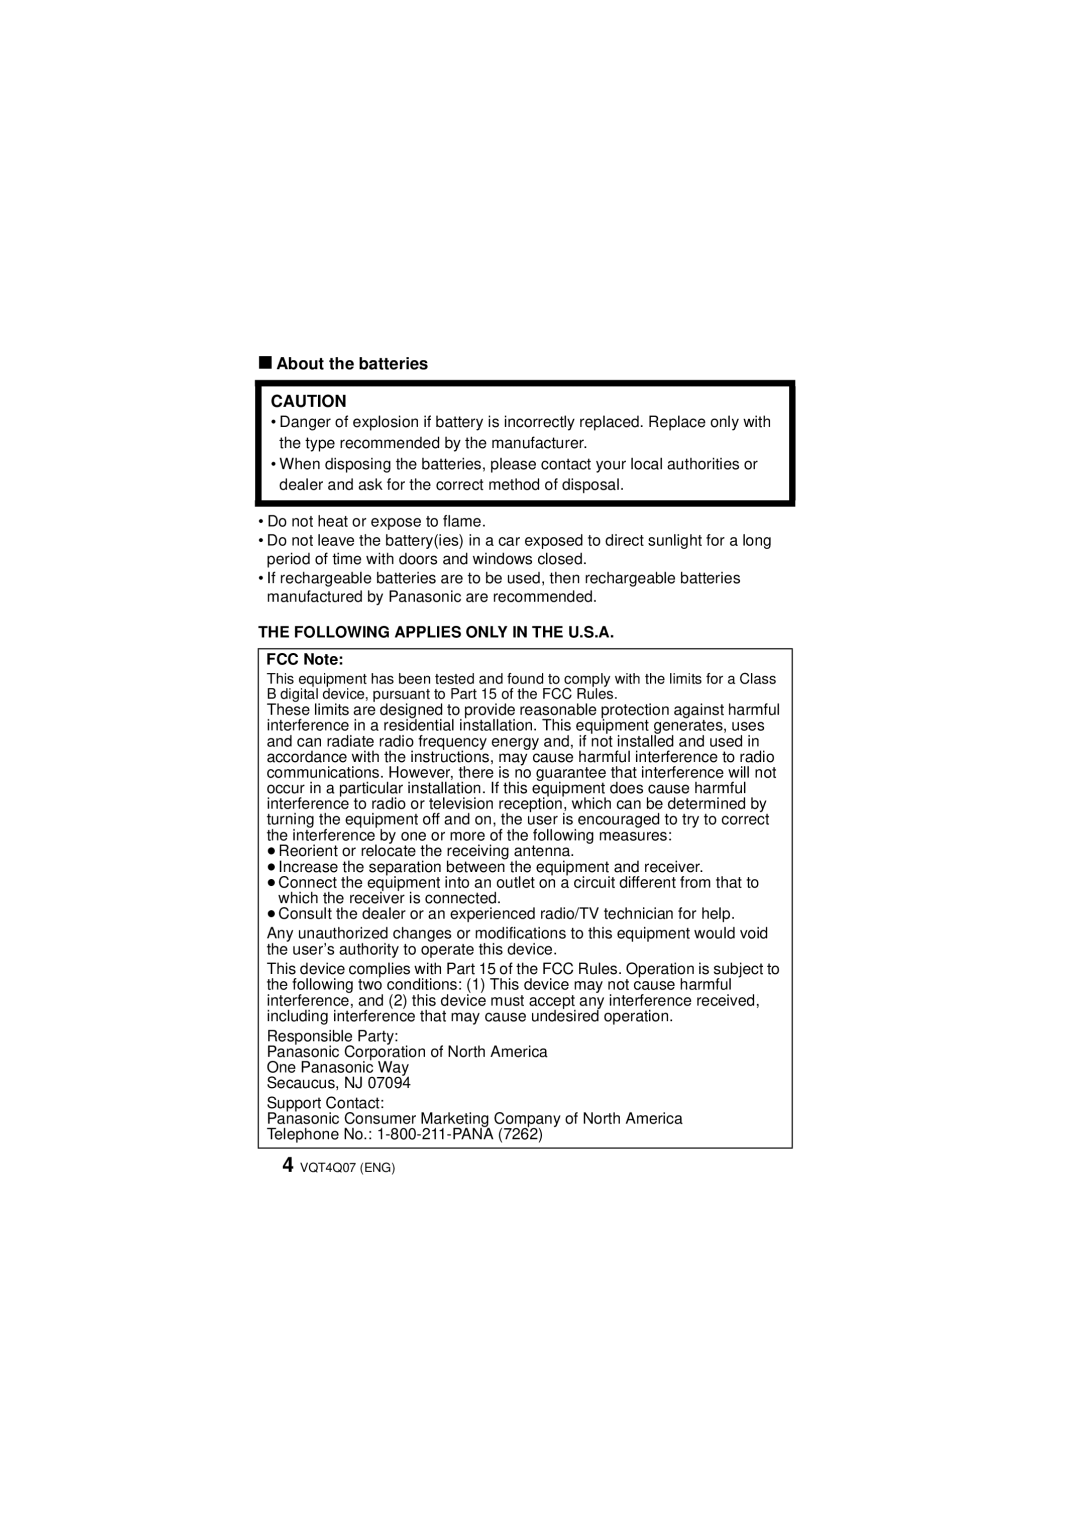 Panasonic DMW-FL360L operating instructions About the batteries, Following Applies only in the U.S.A 